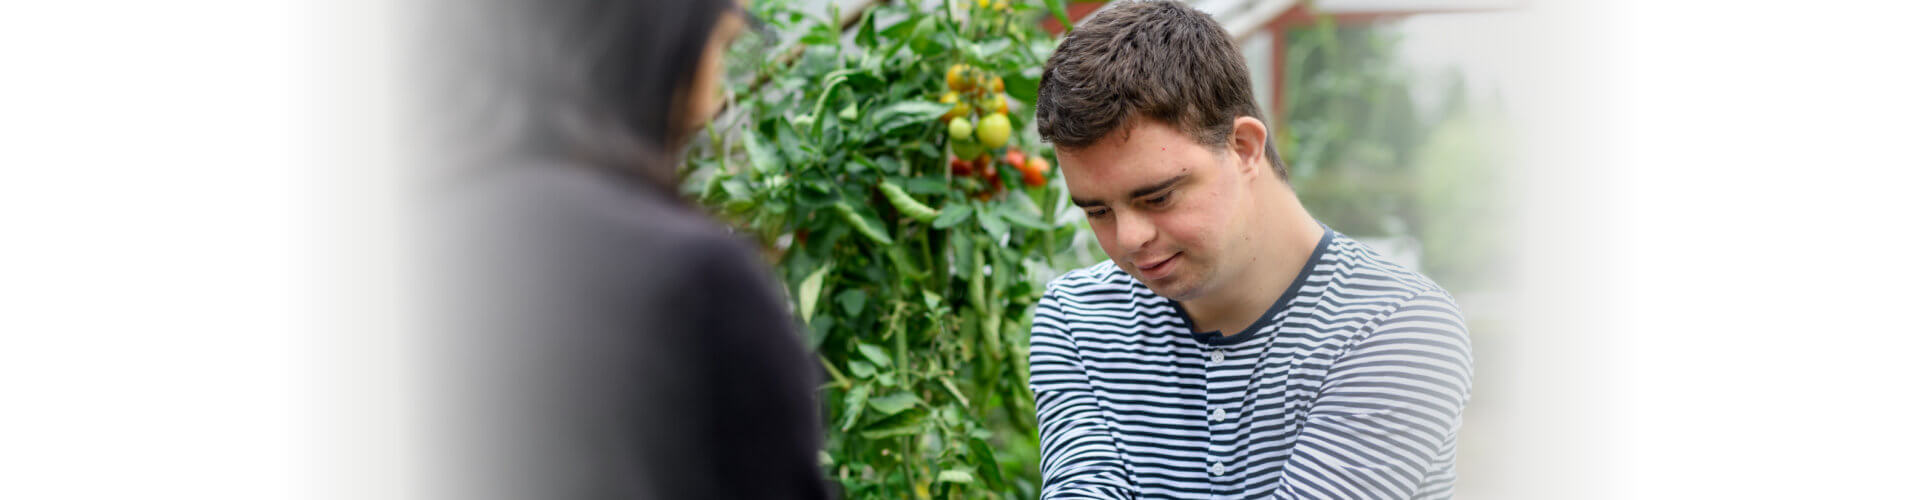 Down syndrome adult man gathering tomatoes in greenhouse, gardening concept.